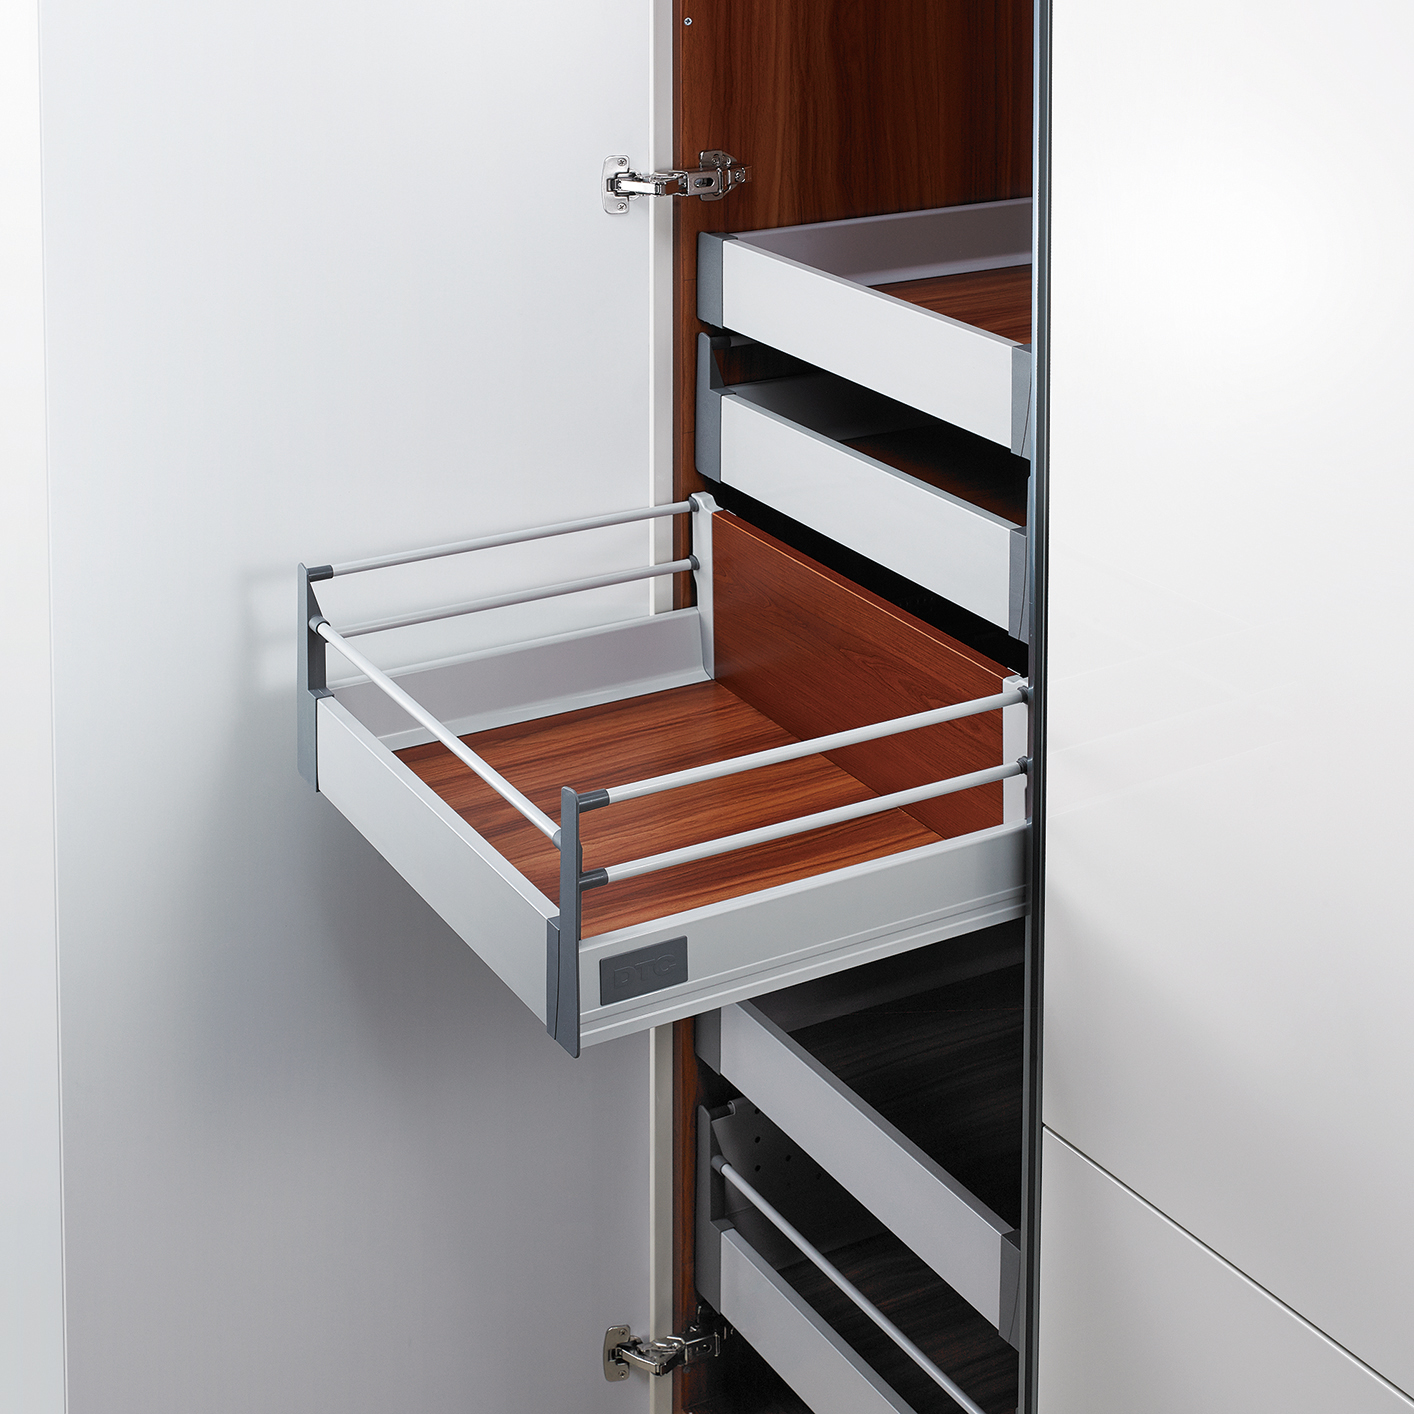 Doublewall Pots & Pans Drawer - Internal with 2 Round Rail and 83mm Drawer Height